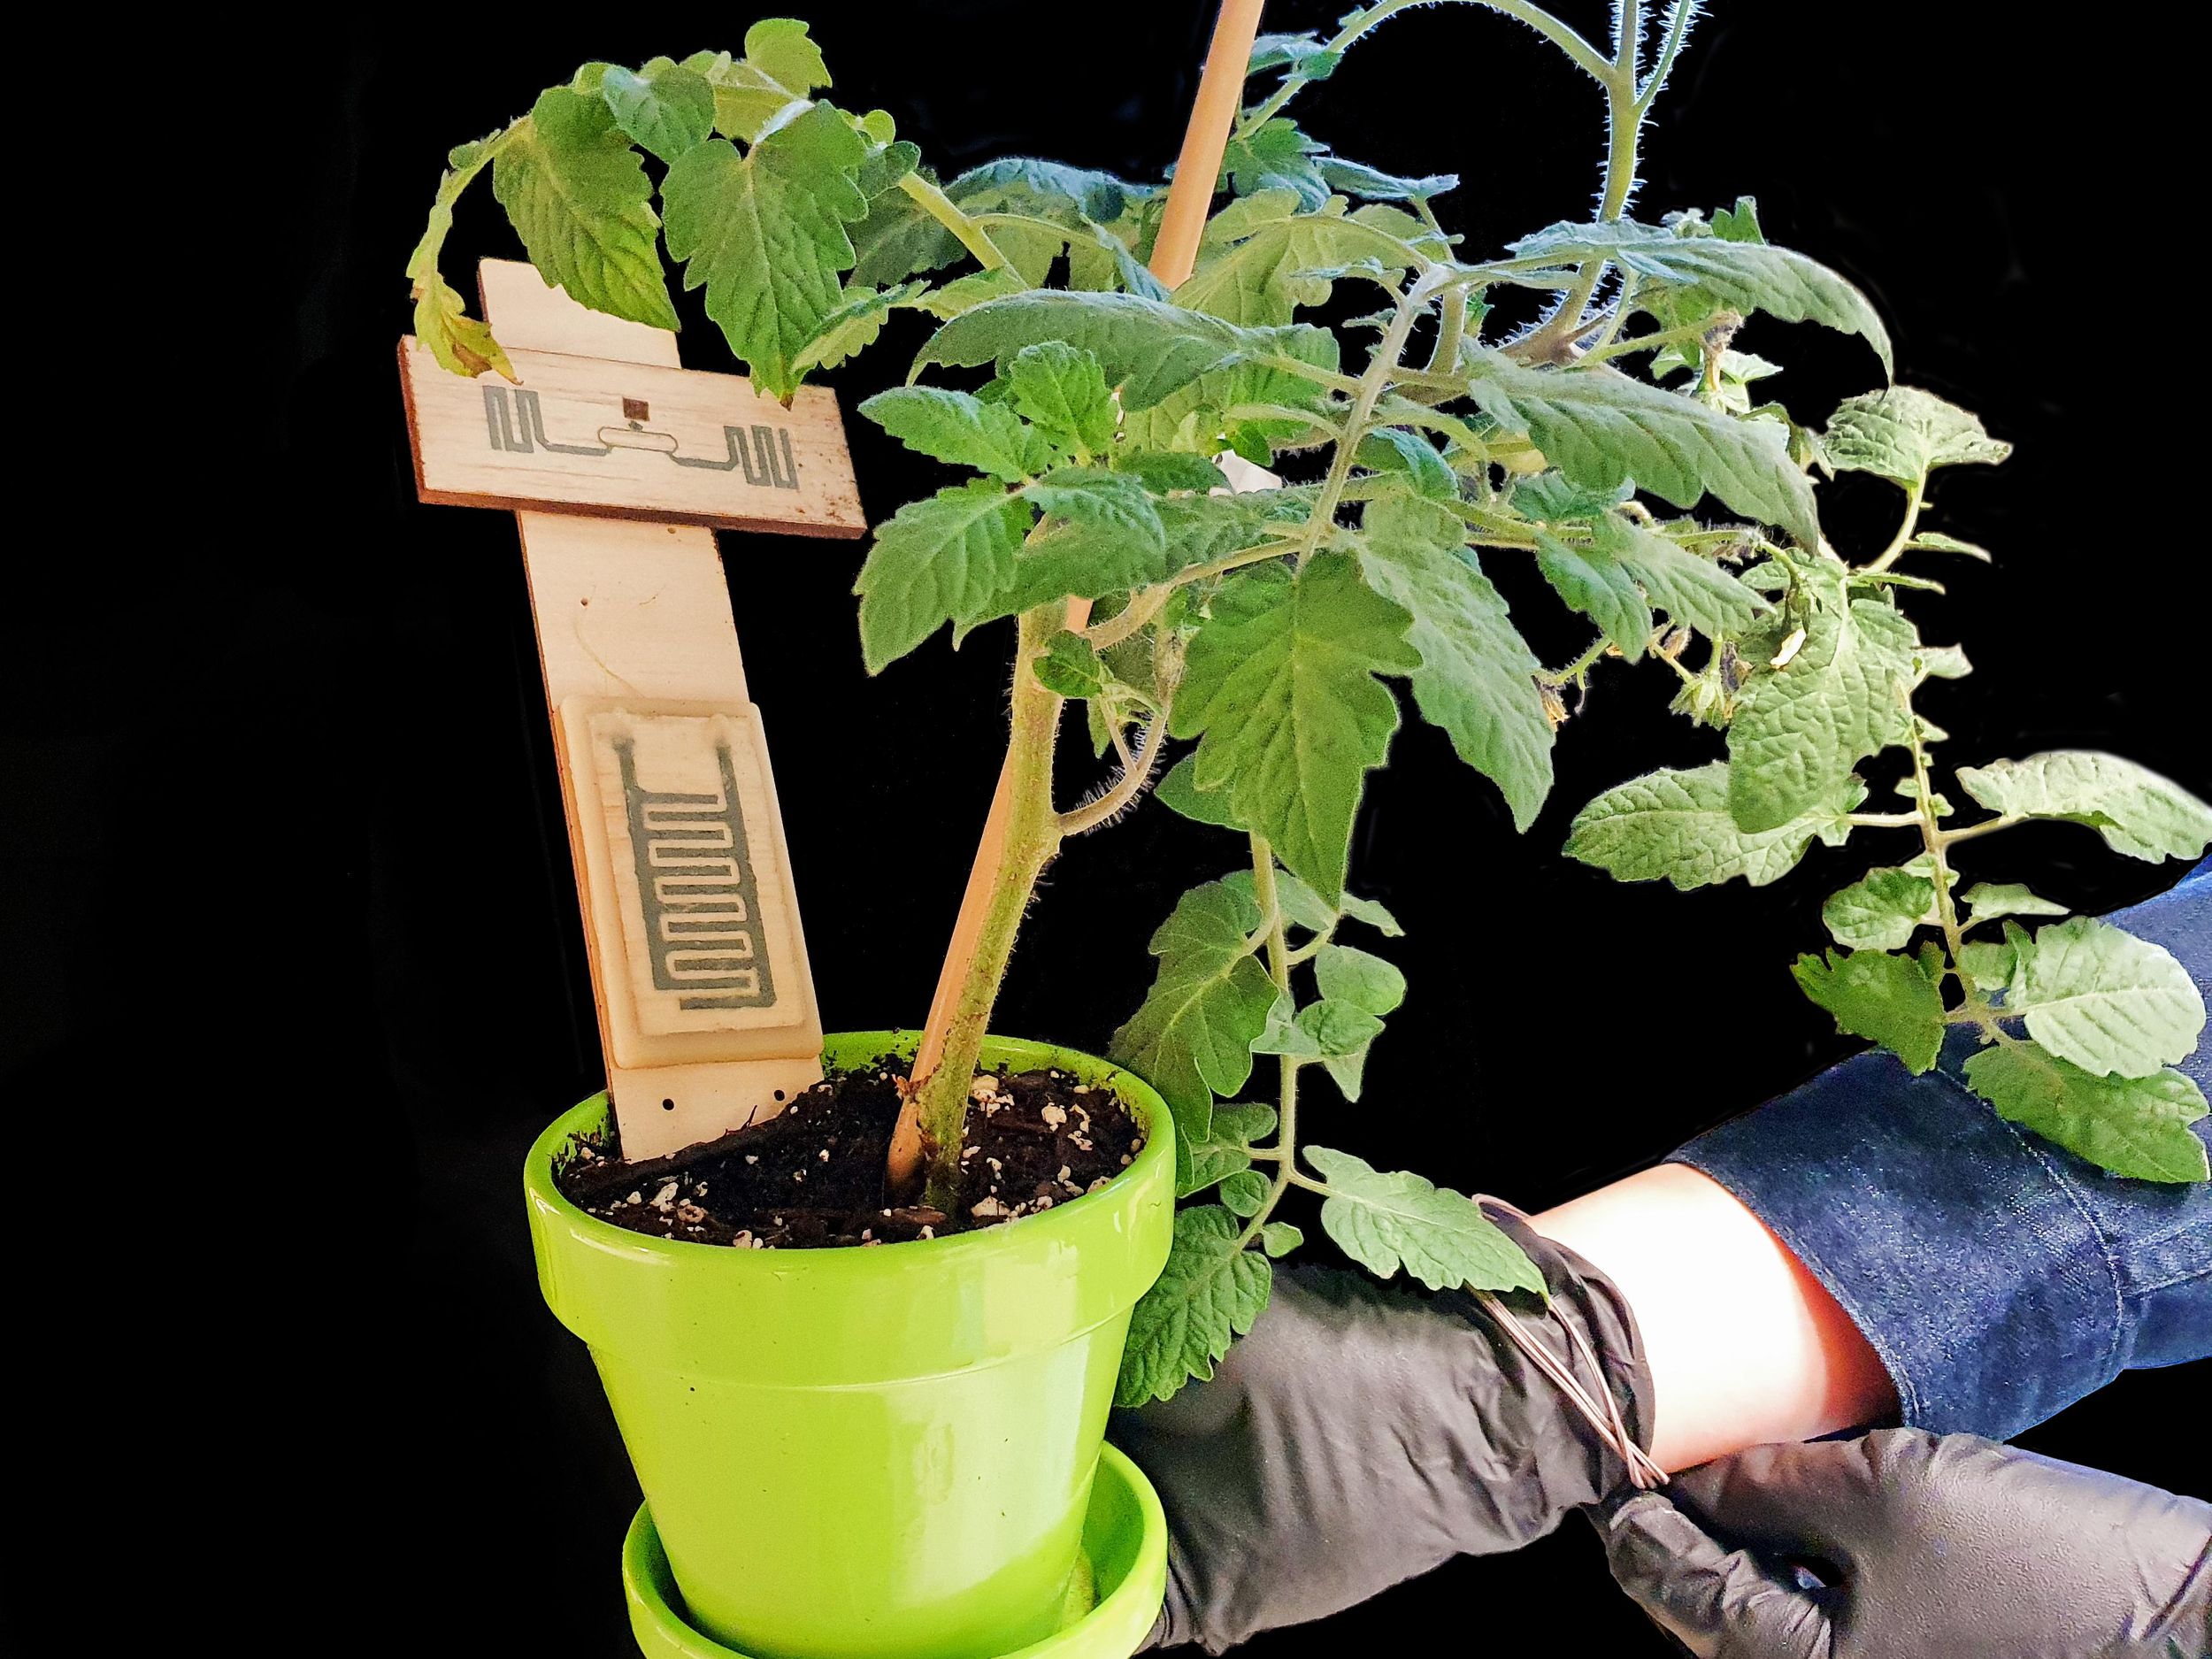 Hands wearing a blue shirt and black gloves hold a green planter filled with soil. A green leafy plant grows from the soil. A wood object in the shape of a cross, with grey circuitry on it, protrudes from the soil.